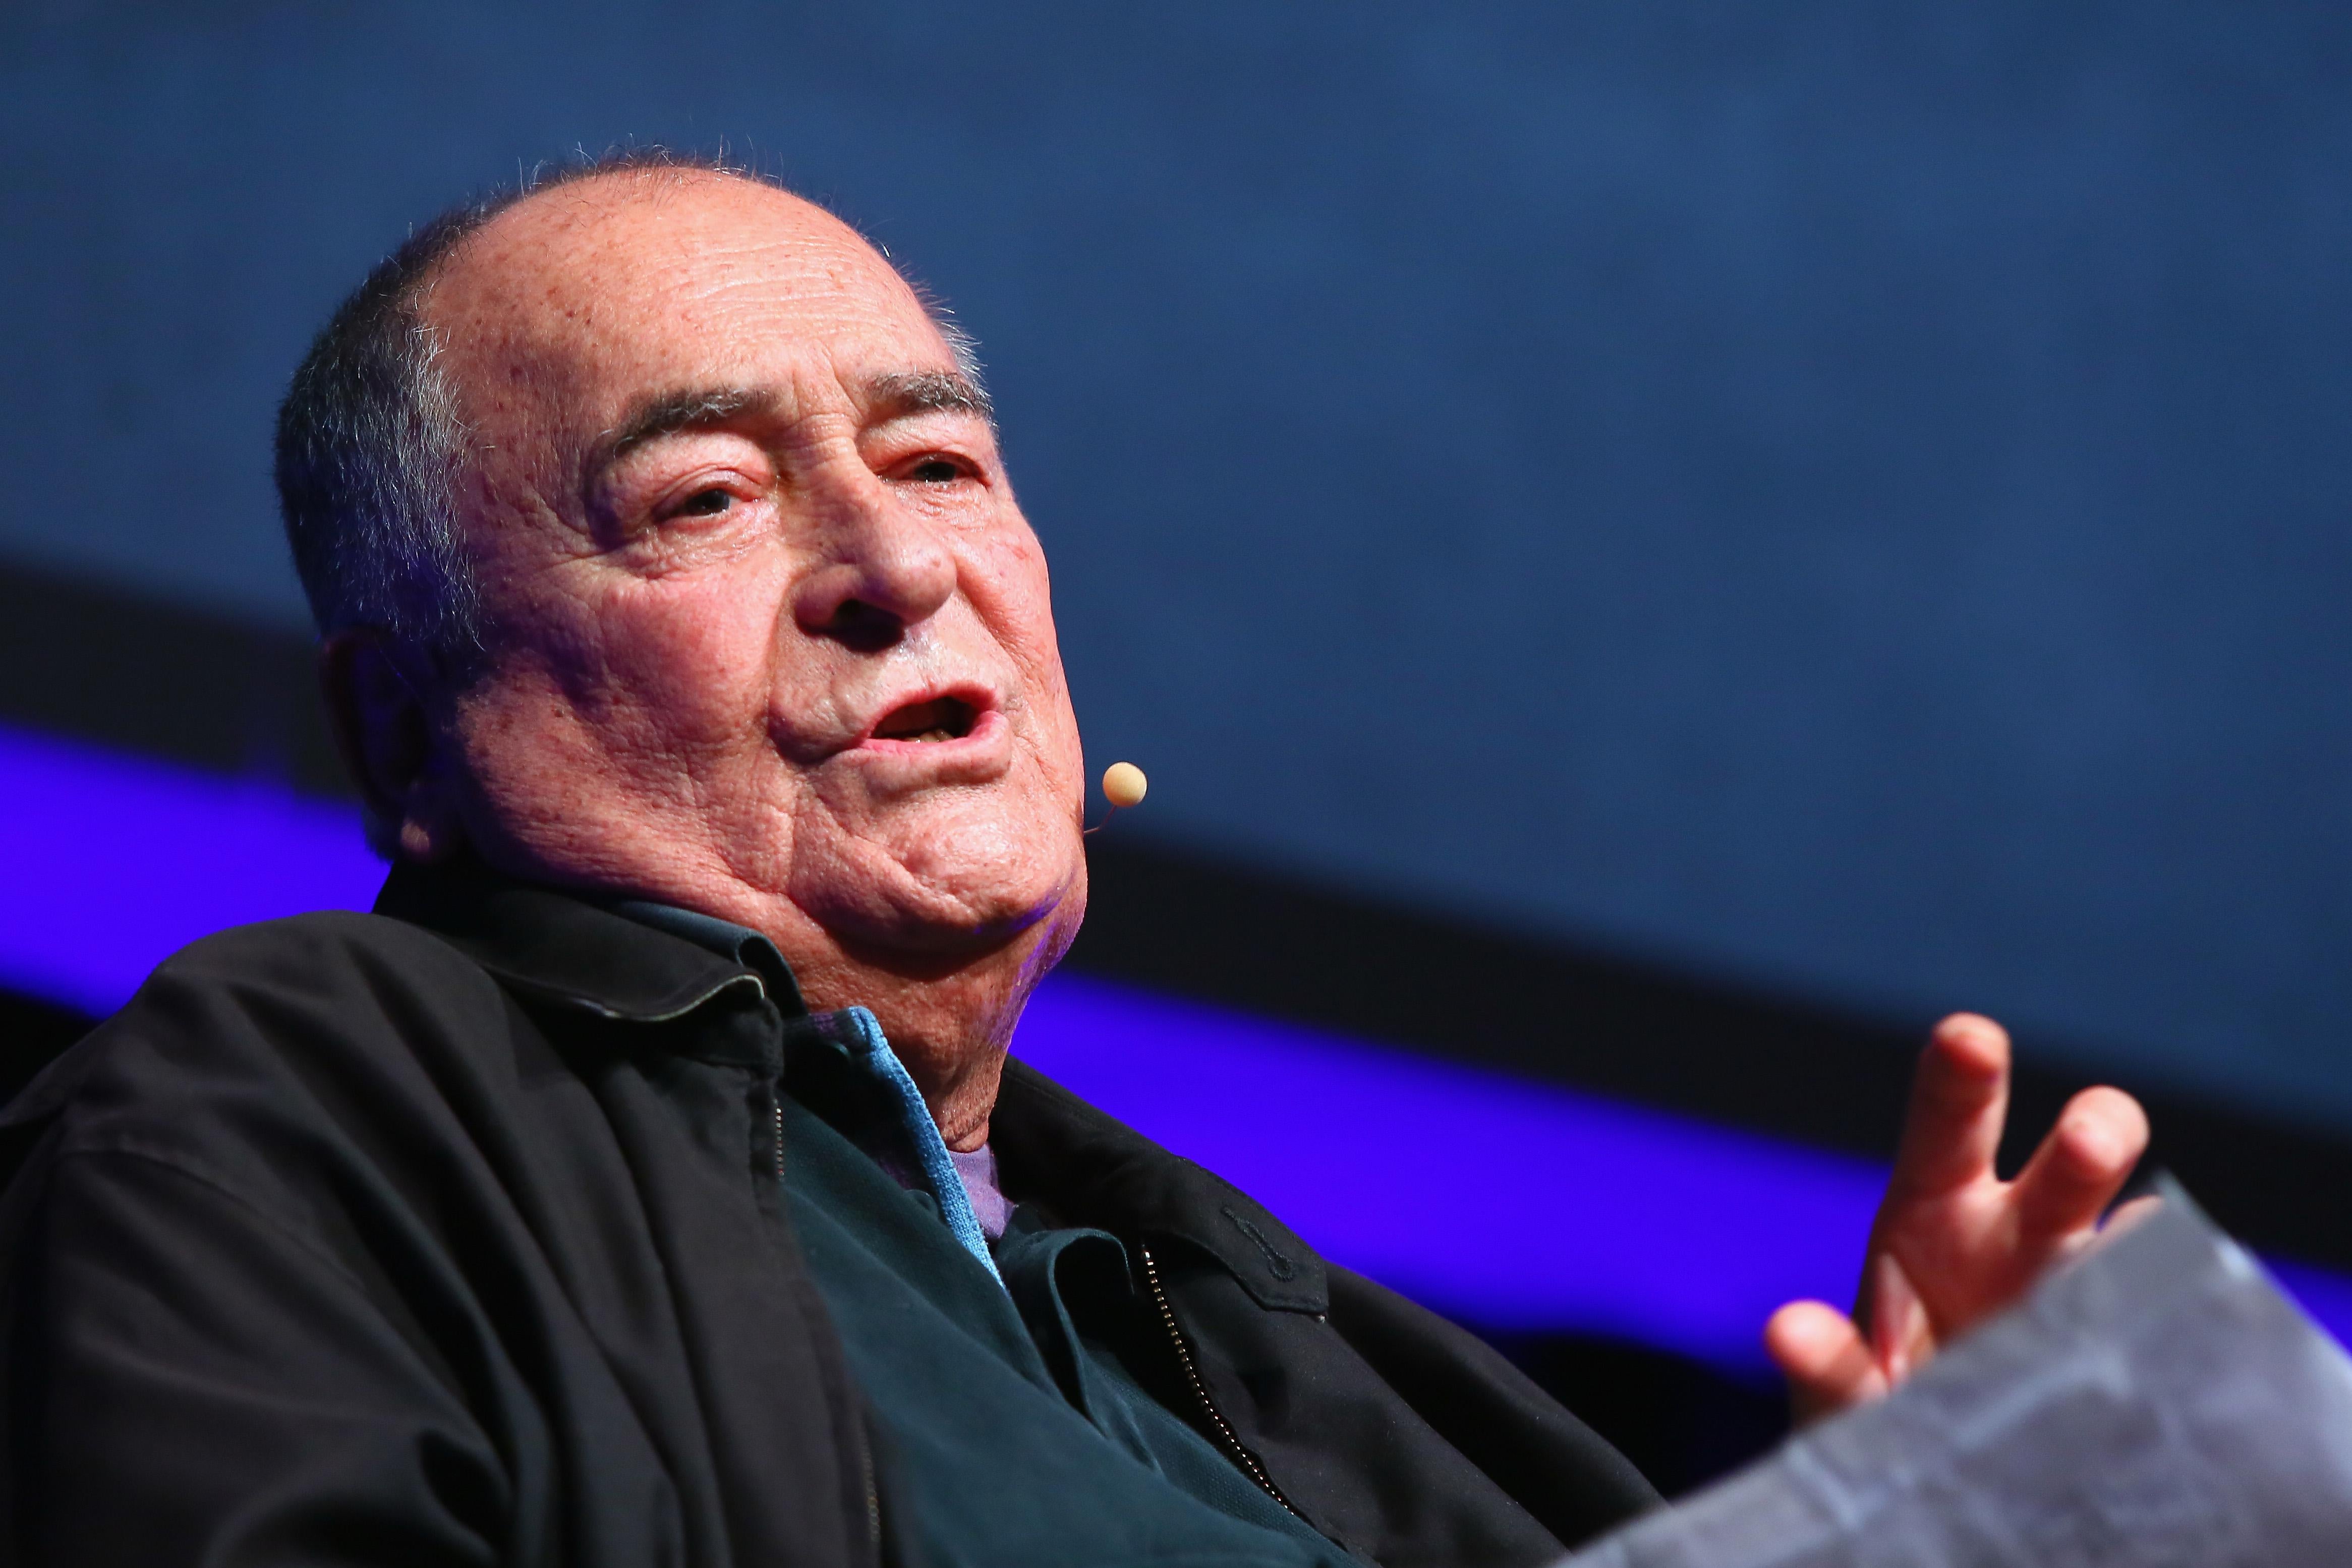 ROME, ITALY - OCTOBER 15:  Bernardo Bertolucci meets the audience during the 11th Rome Film Festival at Auditorium Parco Della Musica on October 15, 2016 in Rome, Italy.  (Photo by Ernesto Ruscio/Getty Images)